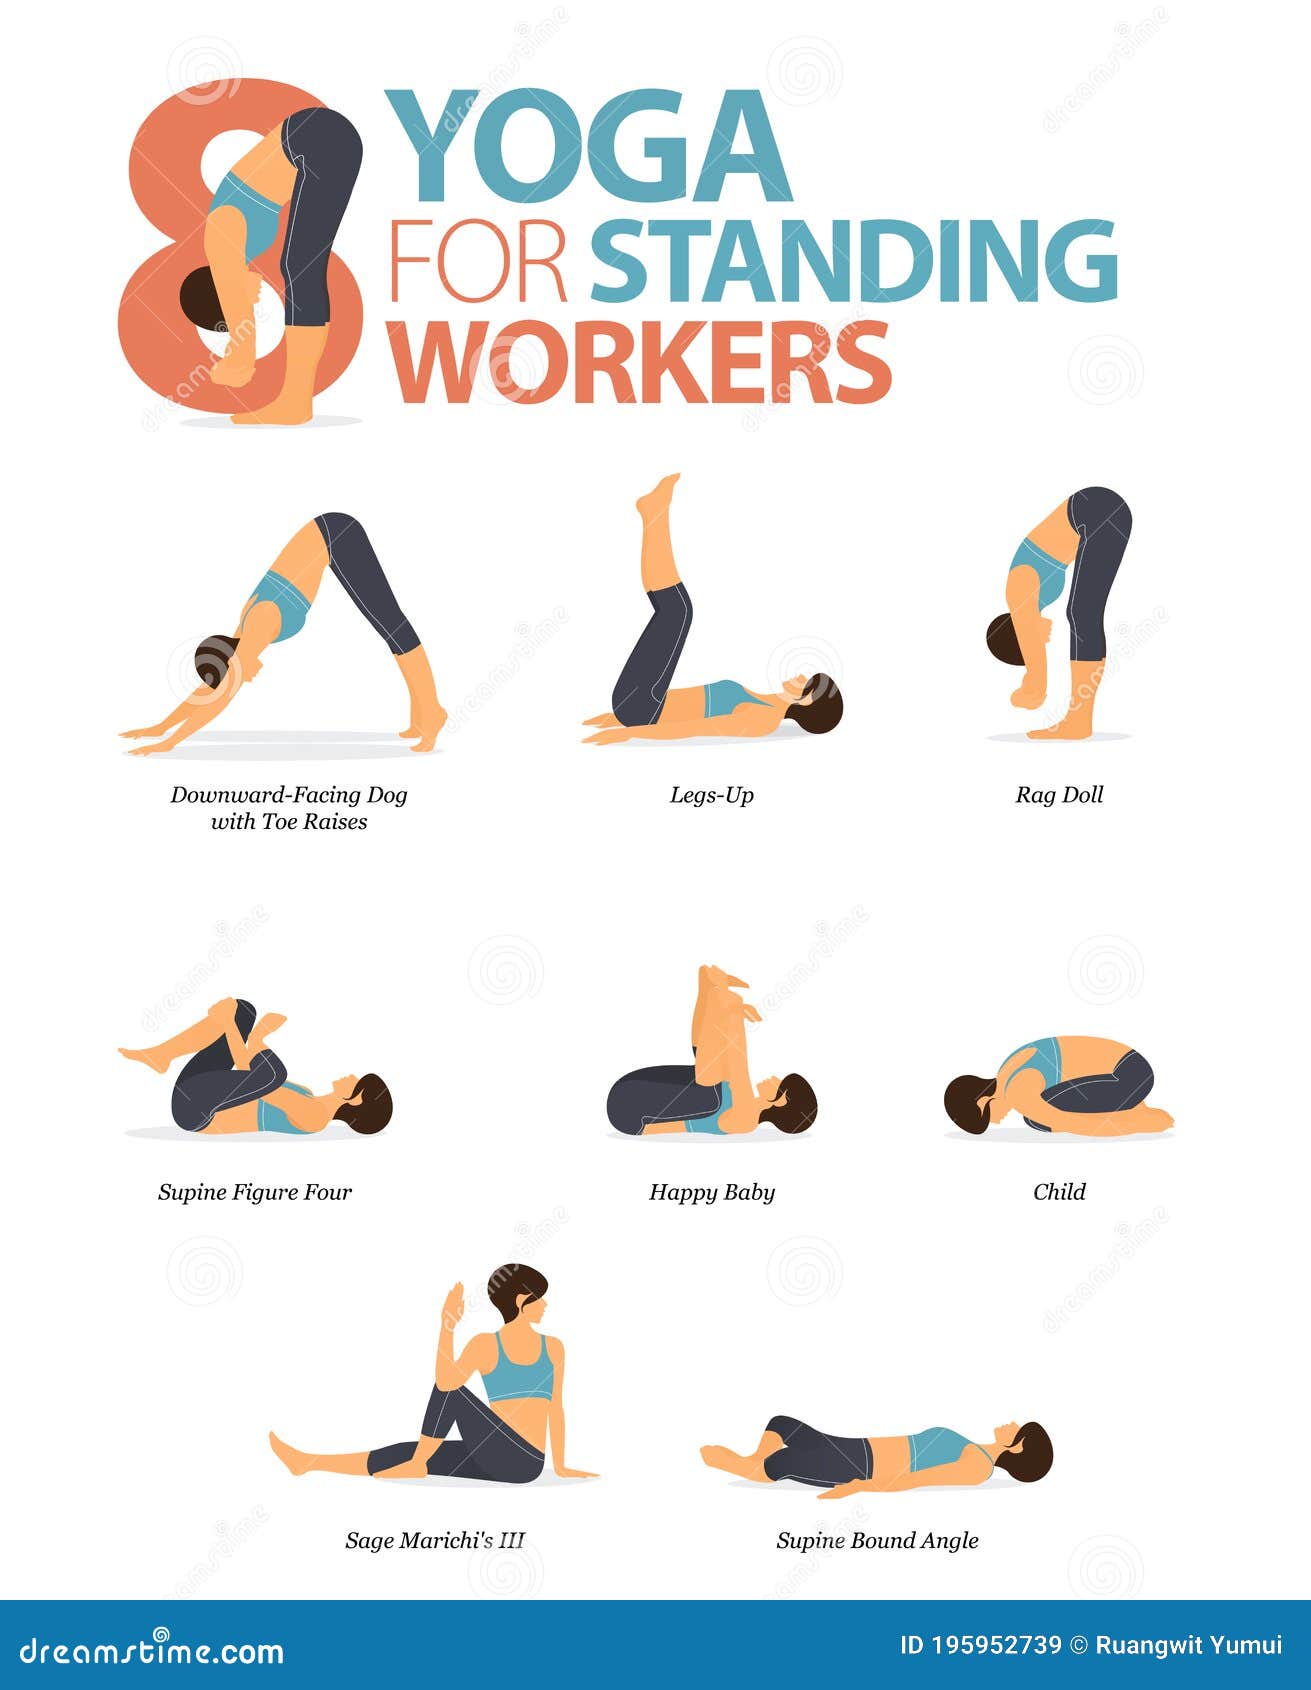 8 Yoga Poses to Help Relieve Back Pain | Geisinger